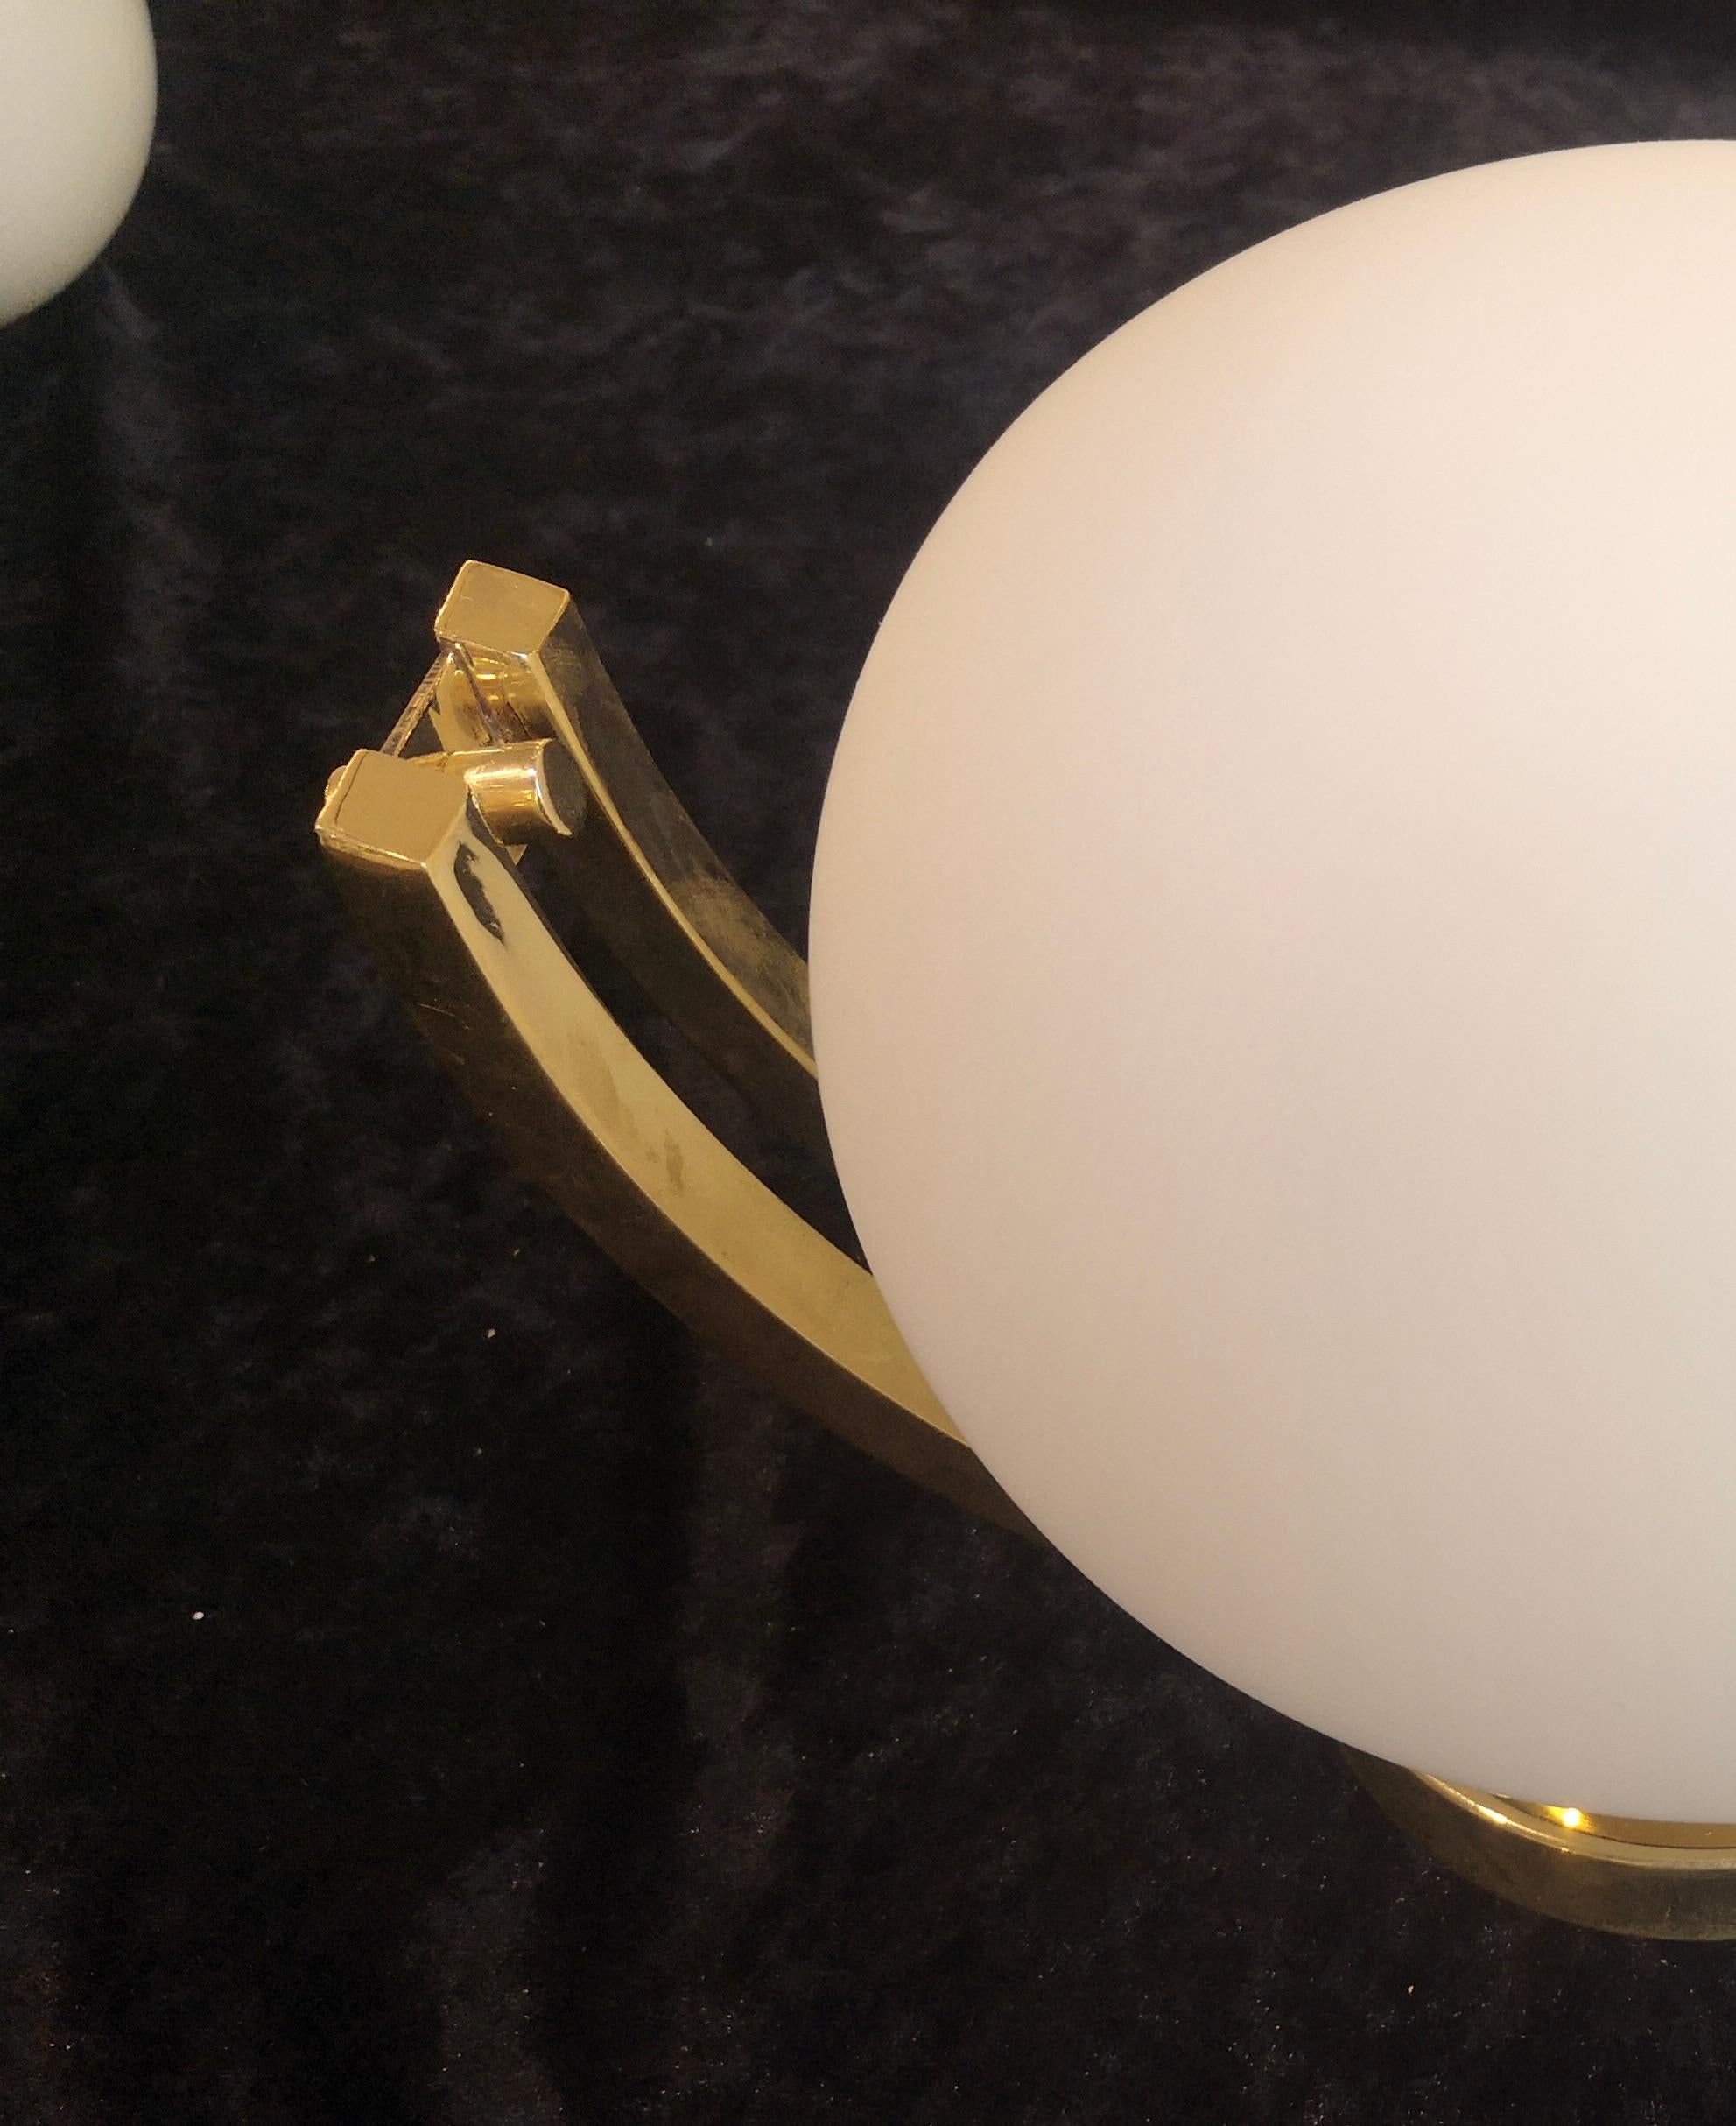 Very classic Murano glass wall light, rich and elegant design, its taste is delicate.

The wall lamp is composed of a brass structure formed by two curved arms that wrap a white glass sphere. Its polished brass frame makes it very rich with a